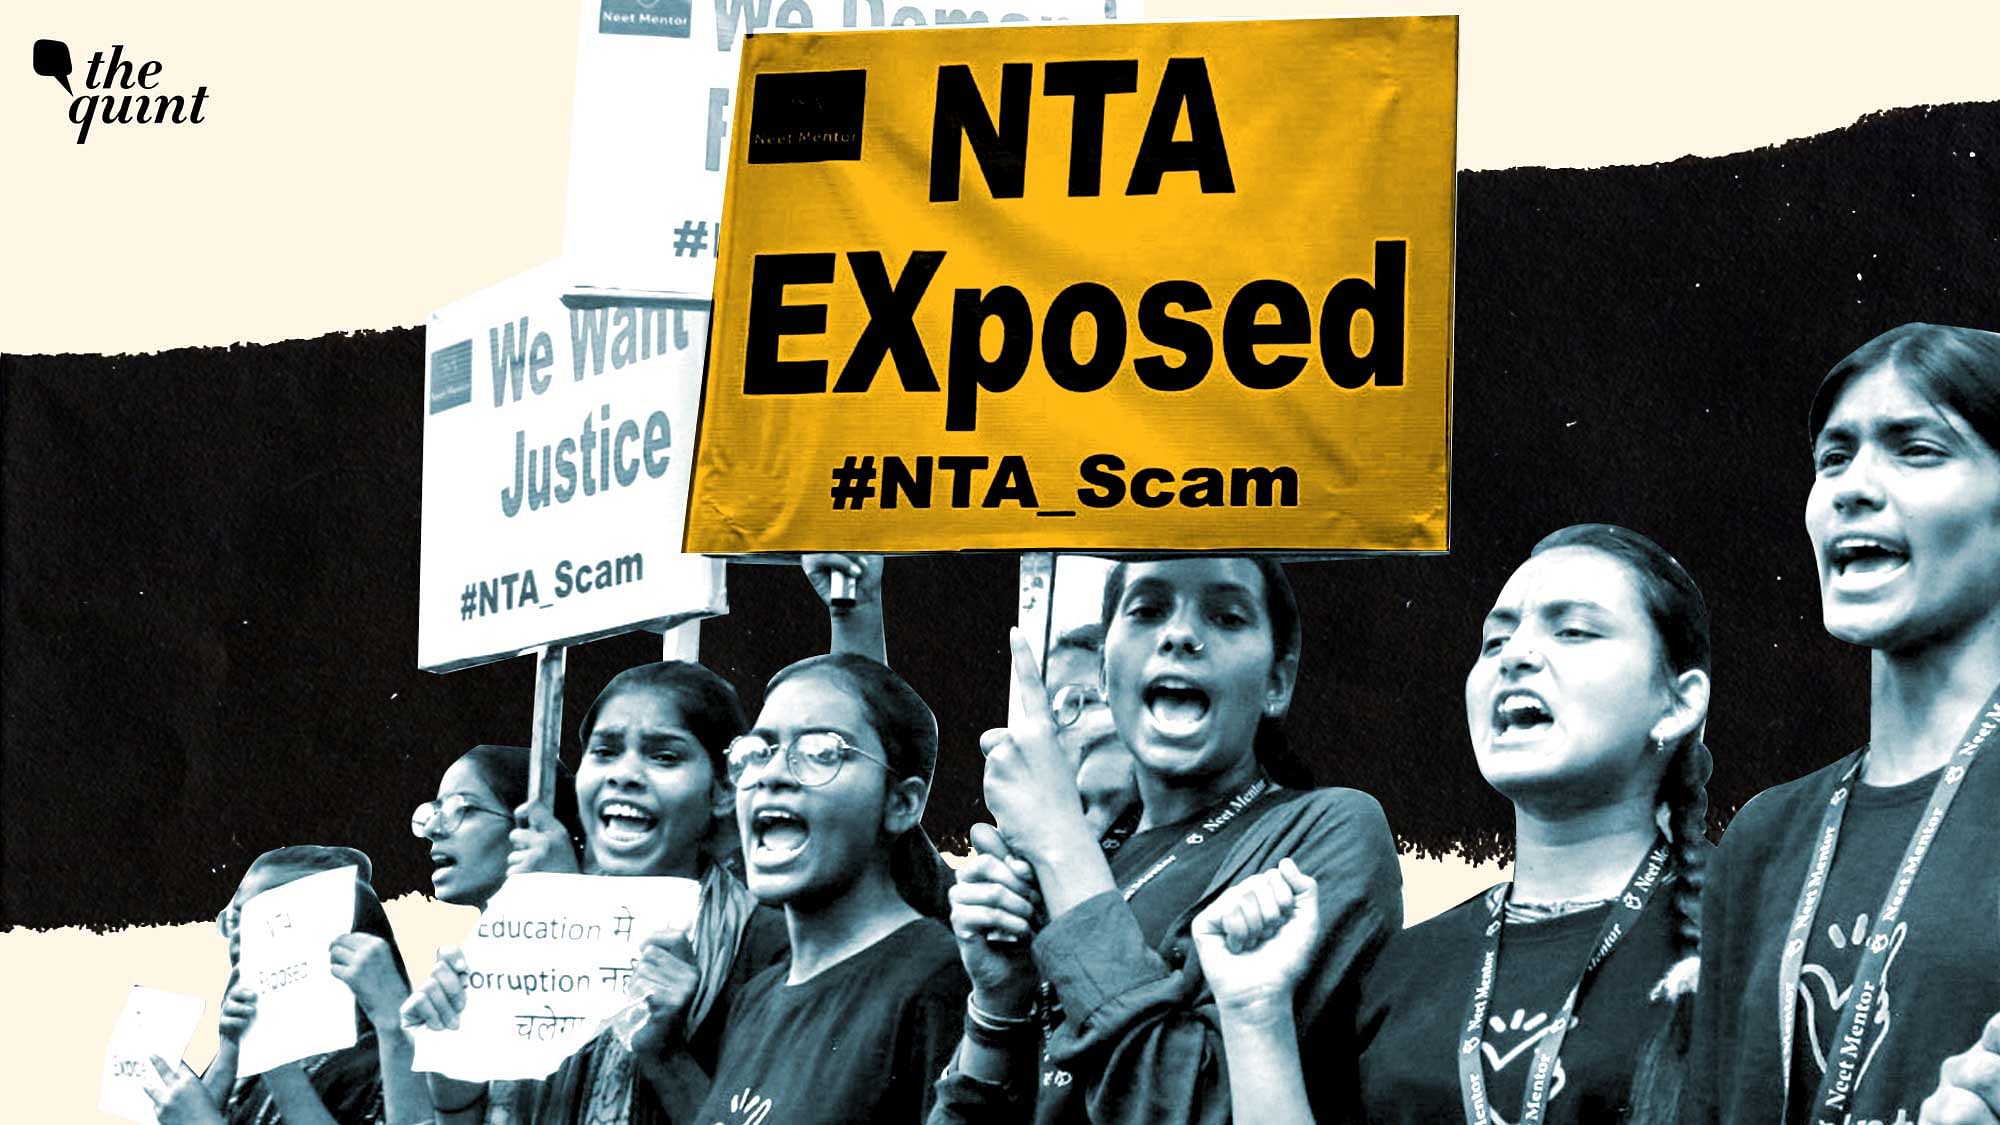 <div class="paragraphs"><p>As the future of lakhs of students hangs in the balance, <strong>The Quint</strong> speaks to educationists and policy experts on what ails the NTA and if reforms could facilitate fair conduct of exams. &nbsp;&nbsp;</p></div>